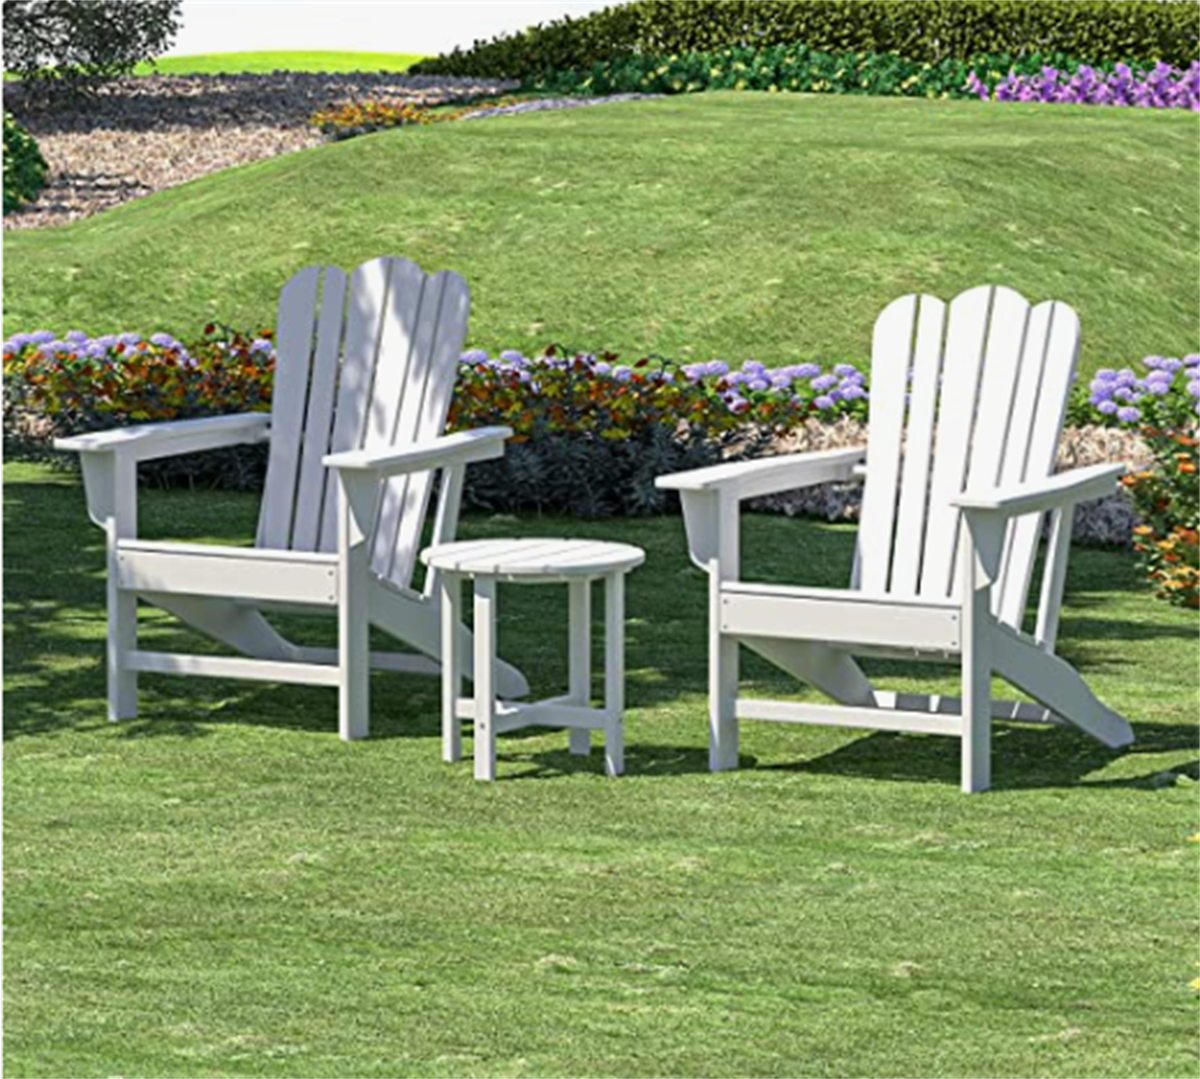 Adirondack Chair Set with 2 Plastic Adirondack Chairs & 1 Outdoor Side Table, Outdoor Adirondack Chair Patio Lounge Chairs with Large Seat & Tall Backrest for Patio Deck, Weather Resistant, White - image 2 of 7